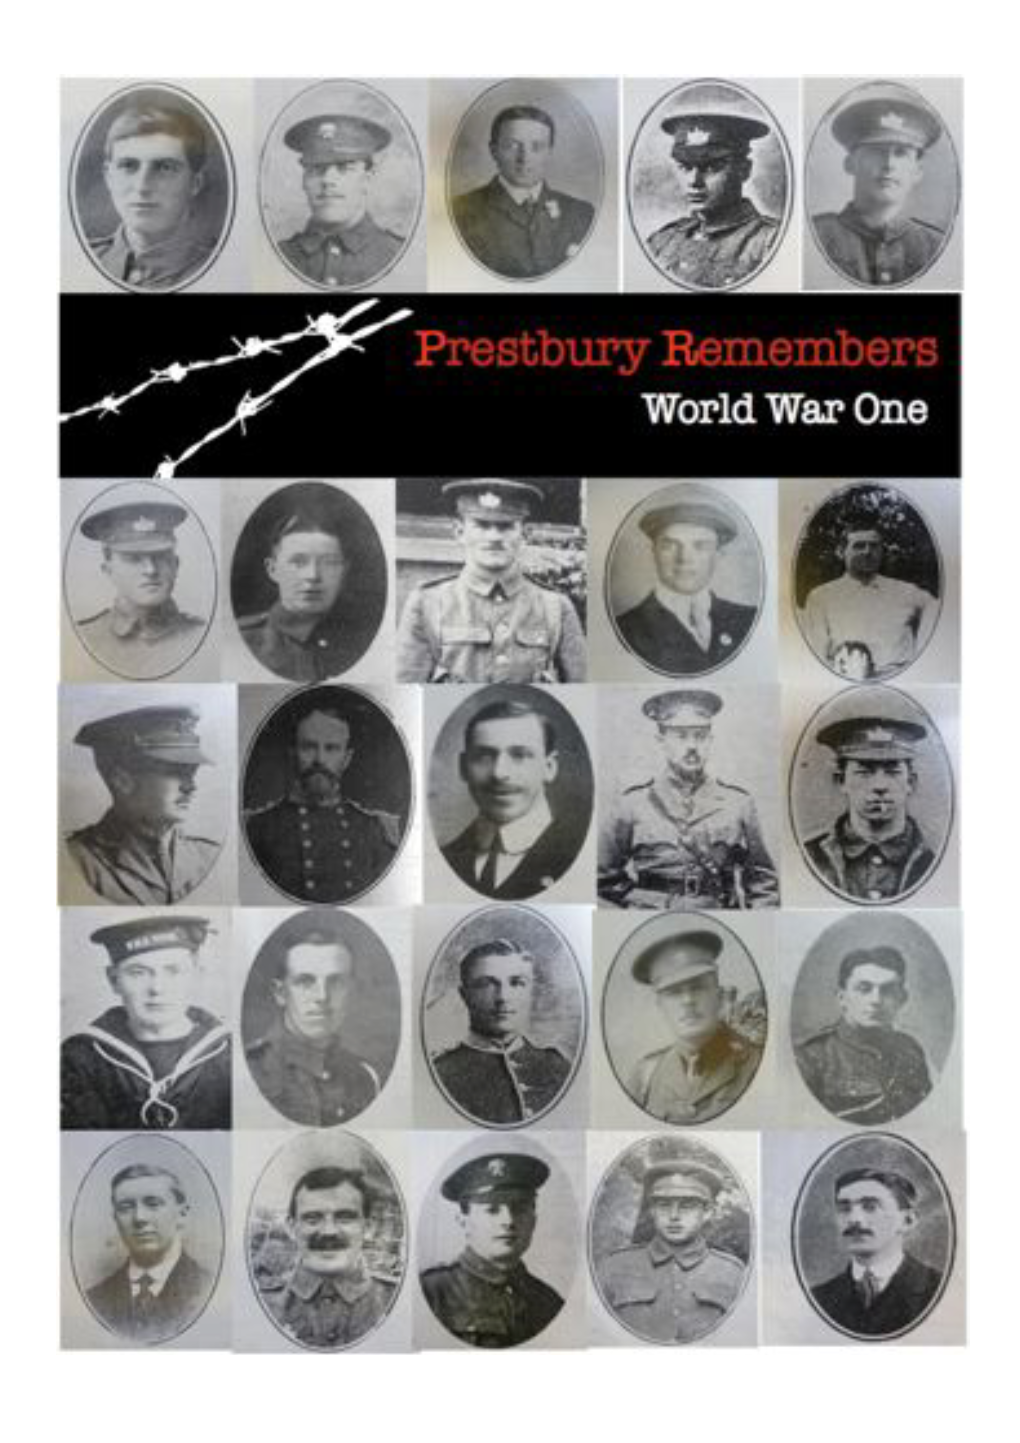 Prestbury Remembers' Was Written by Rebecca Sillence As a Memorial to the Men from Prestbury Who Lost Their Lives During WWI